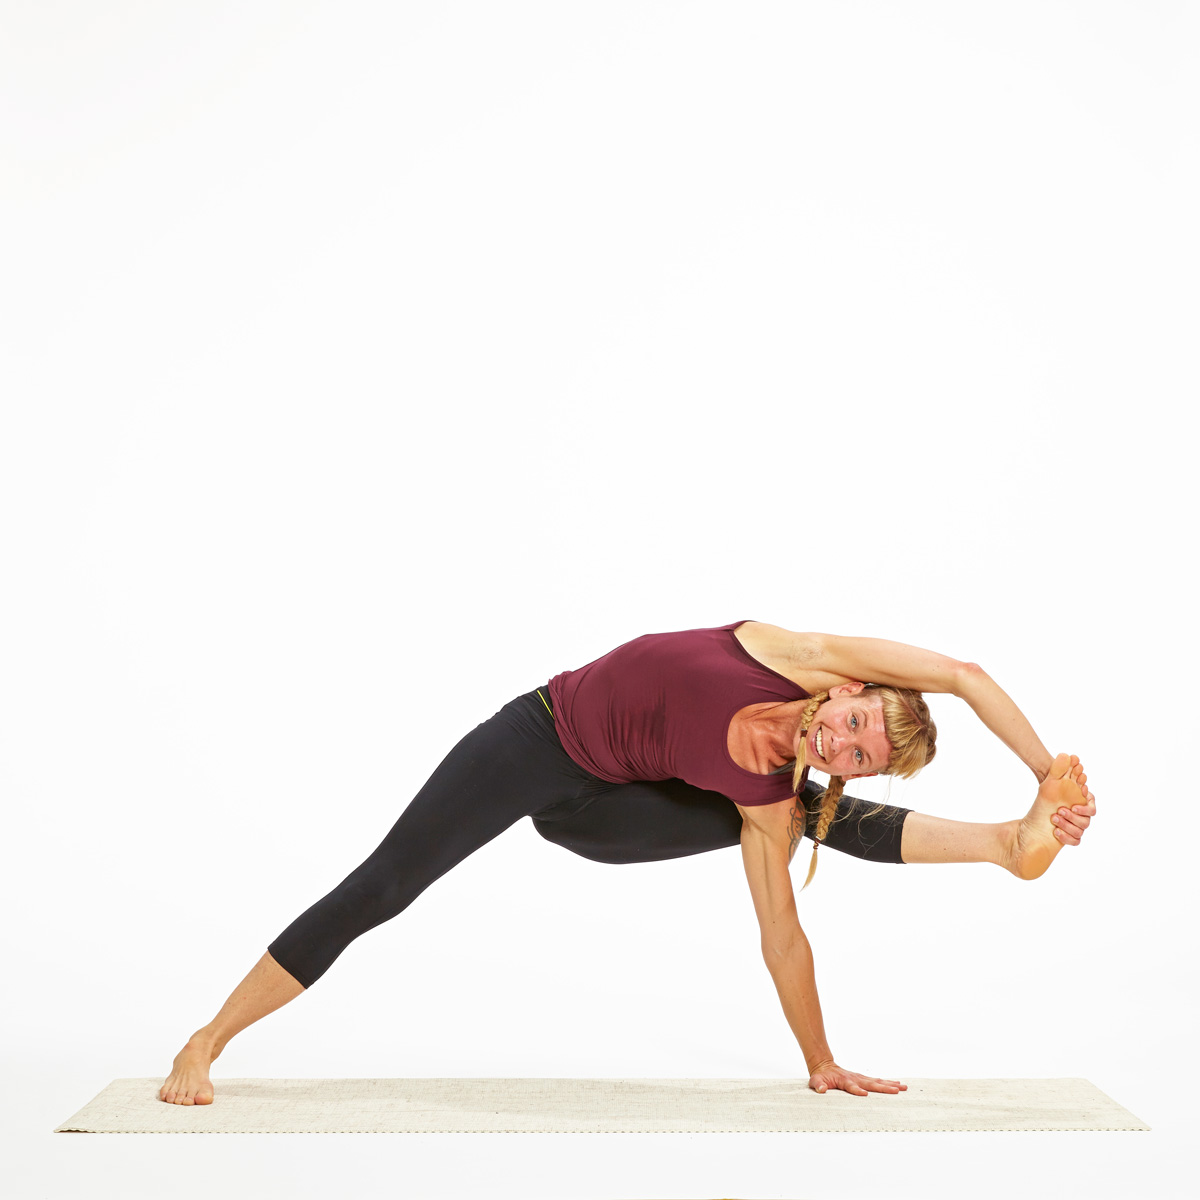 Yoga Inc. - YOGA INC TEACHER'S TIPS! 🧘🏻‍♀️ Join @yogoshann this week for  our #YogaTeachersTips to learn more on how to perfect the pose  Visvamitrasana. 1. Starting in Lizard Pose, tuck your